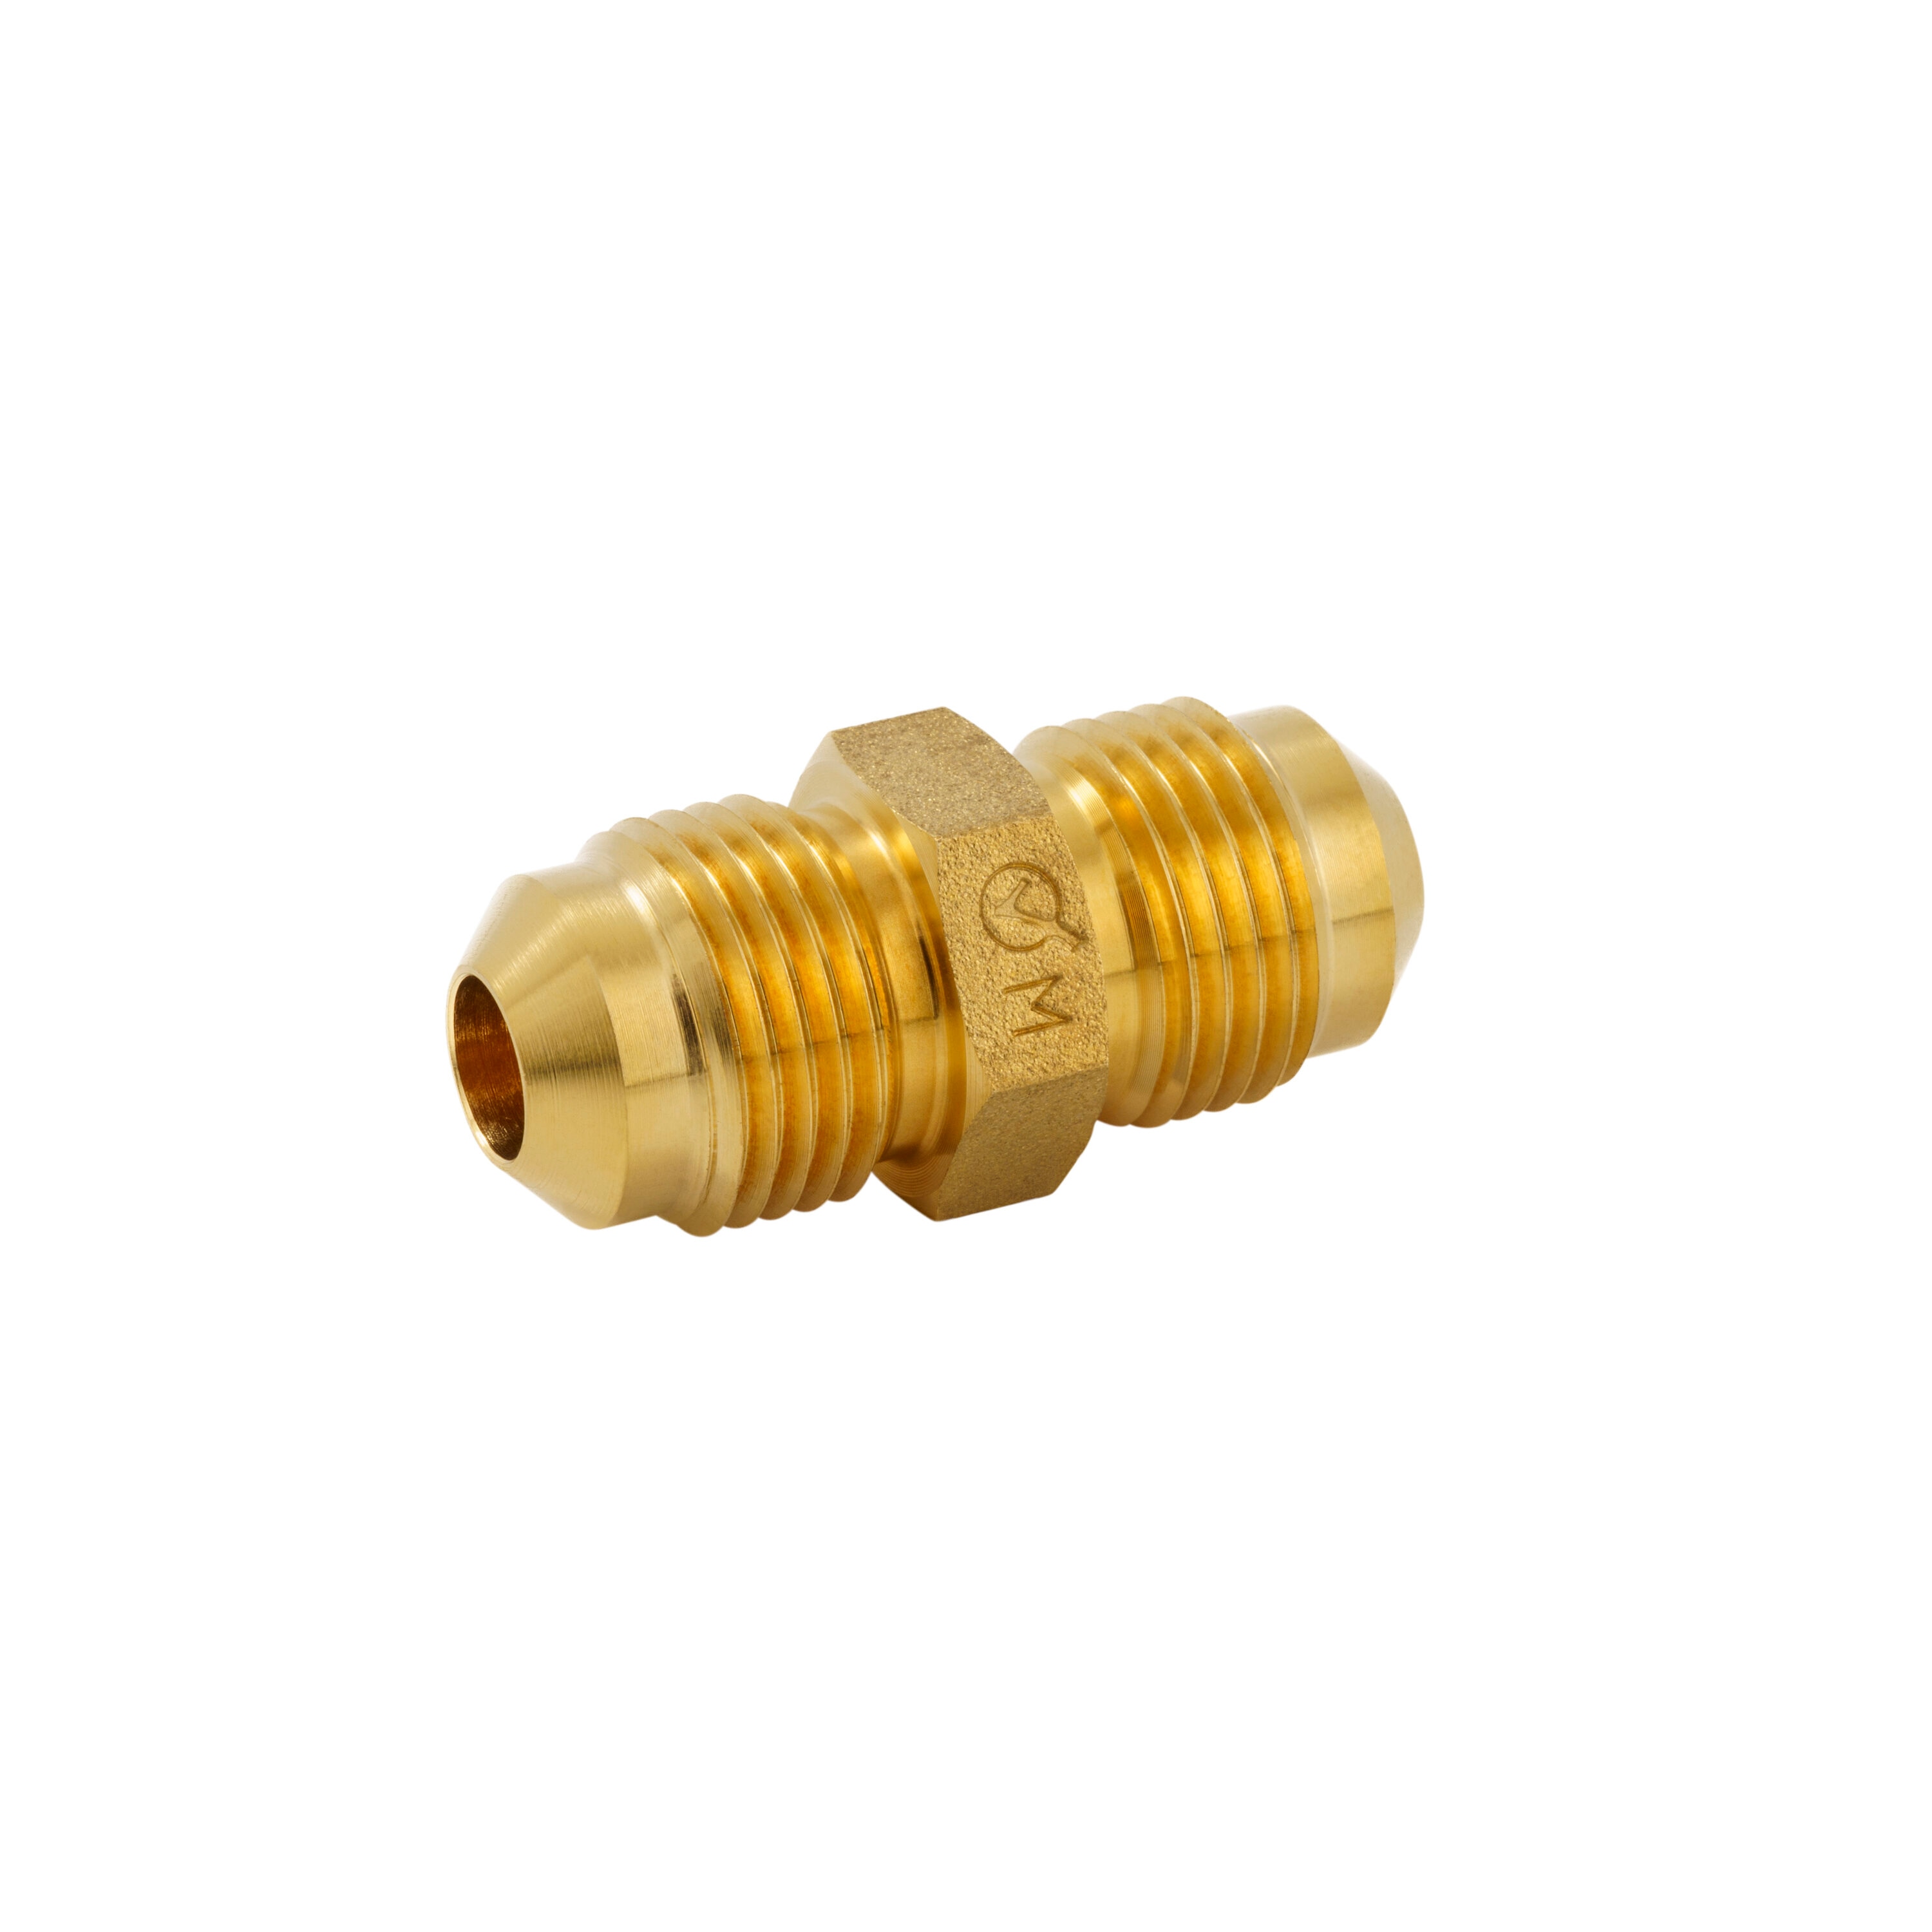 Male x Male Connectors and Unions - Hydraulic Fittings